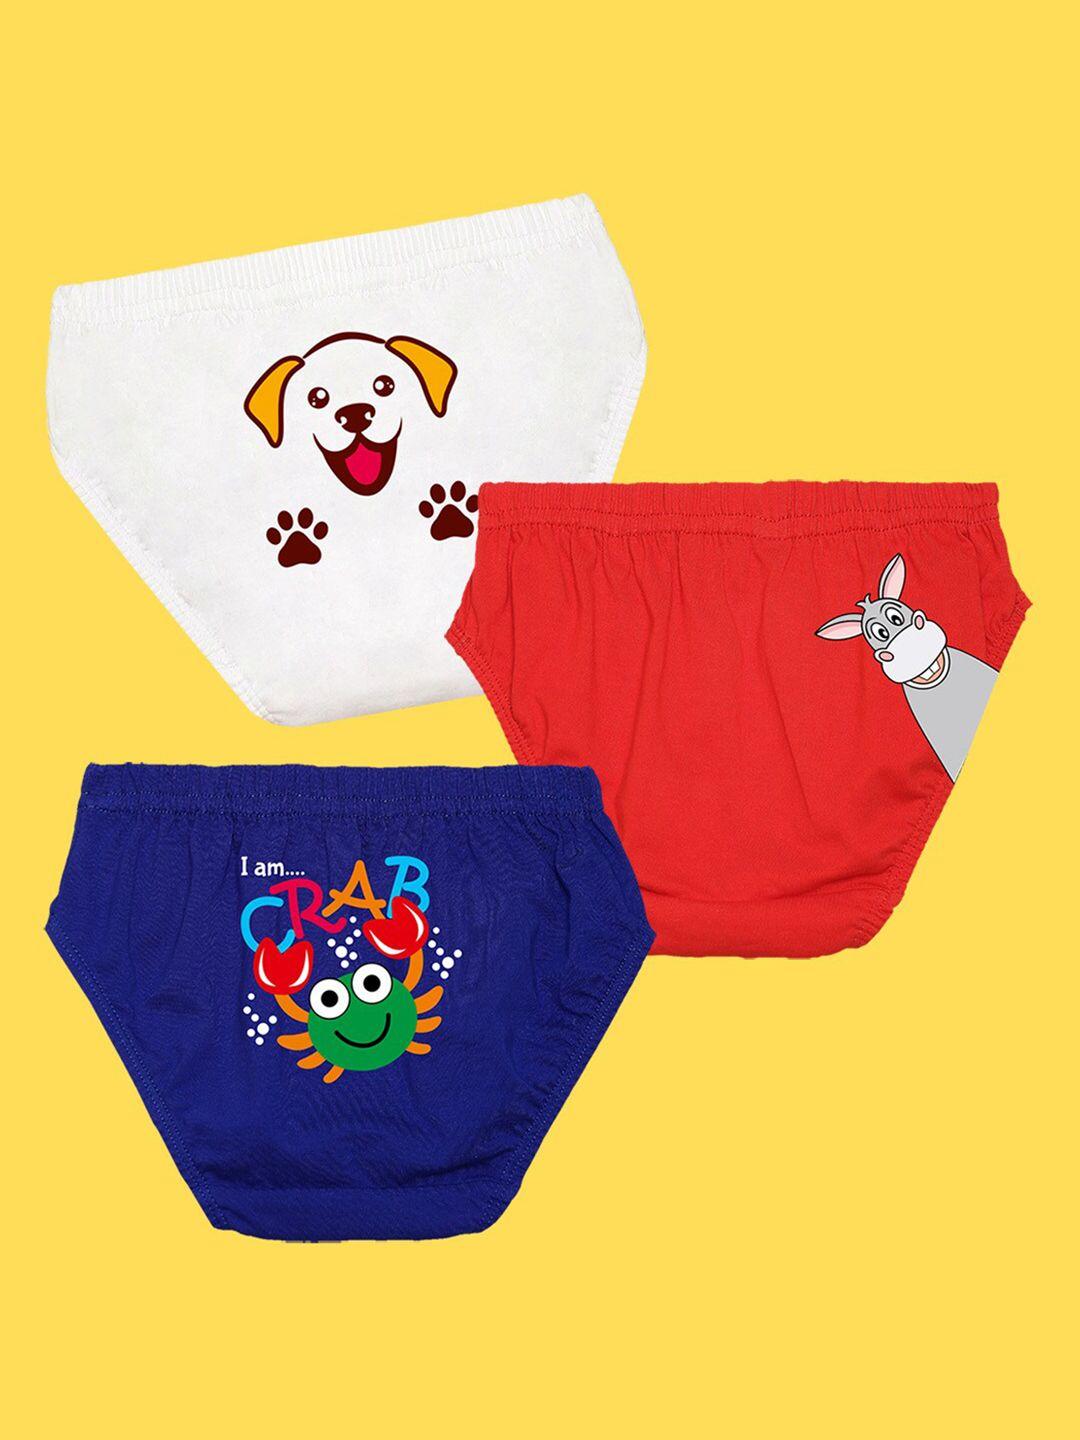 nusyl boys pack of 3 white, red & royal blue printed briefs